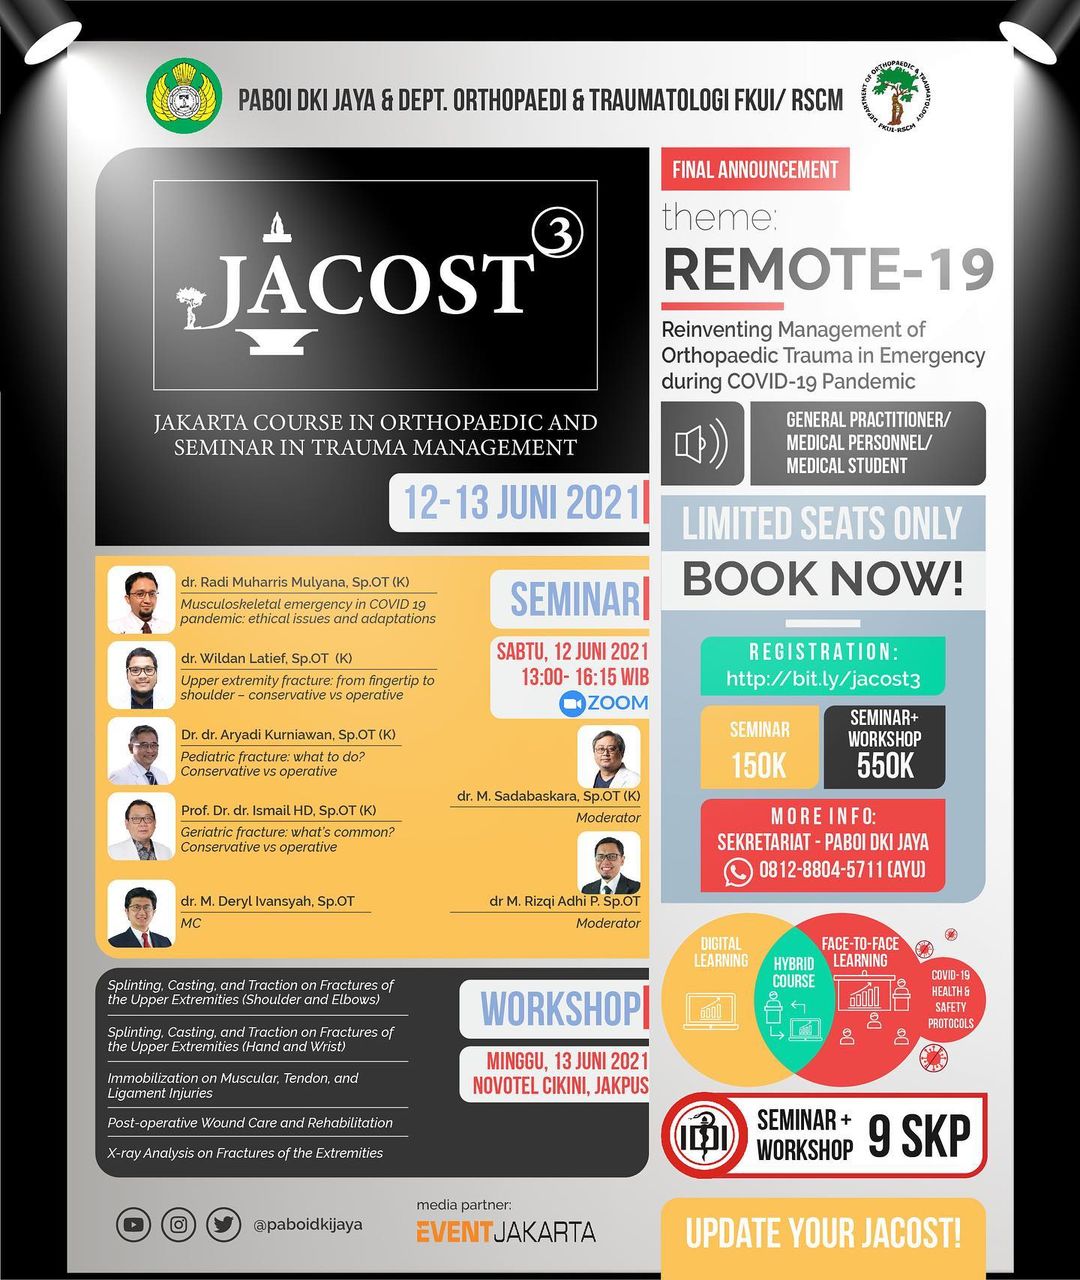 JACOST 3 (Jakarta Course in Orthopaedic and Seminar in Trauma Management)